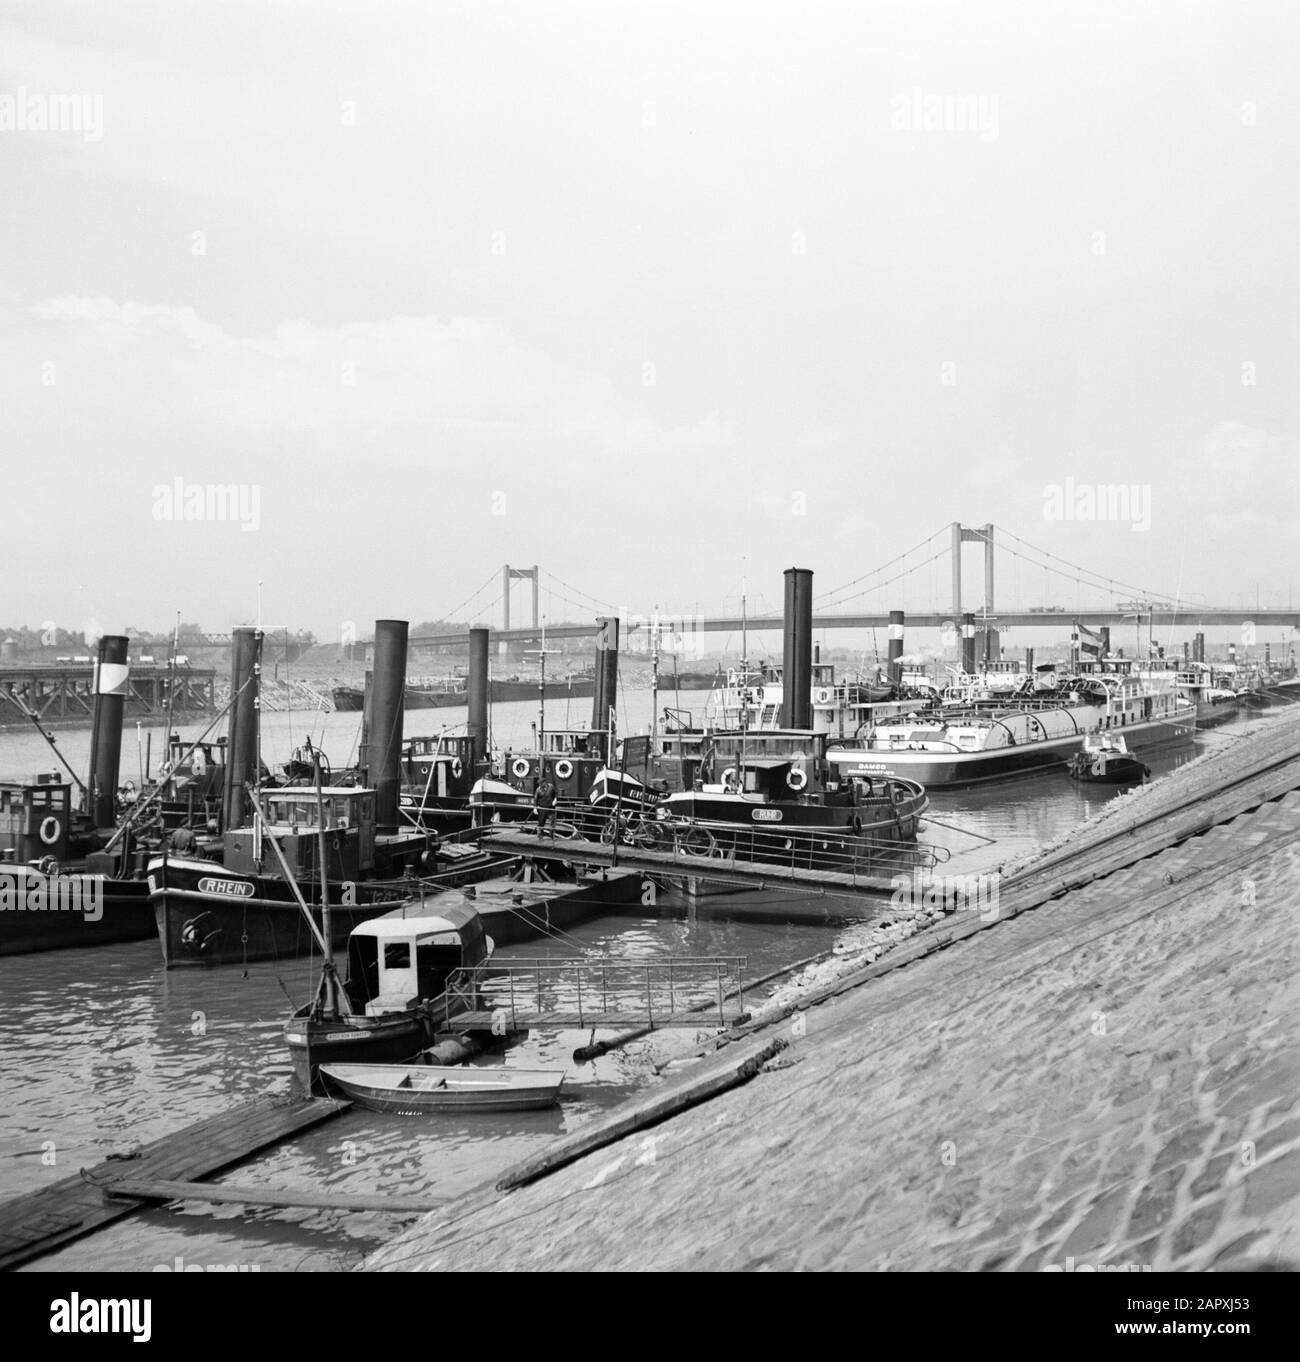 Rhine navigation, report from tugboat Damco 9: West Germany  Steamtugs docked in the port of Duisburg-Ruhrort including the towlers Damco, Rhein, Ruhr and Pioneer Date: April 1, 1955 Location: Duisburg, Germany, West Germany Keywords: ports, tugs, steamships Stock Photo